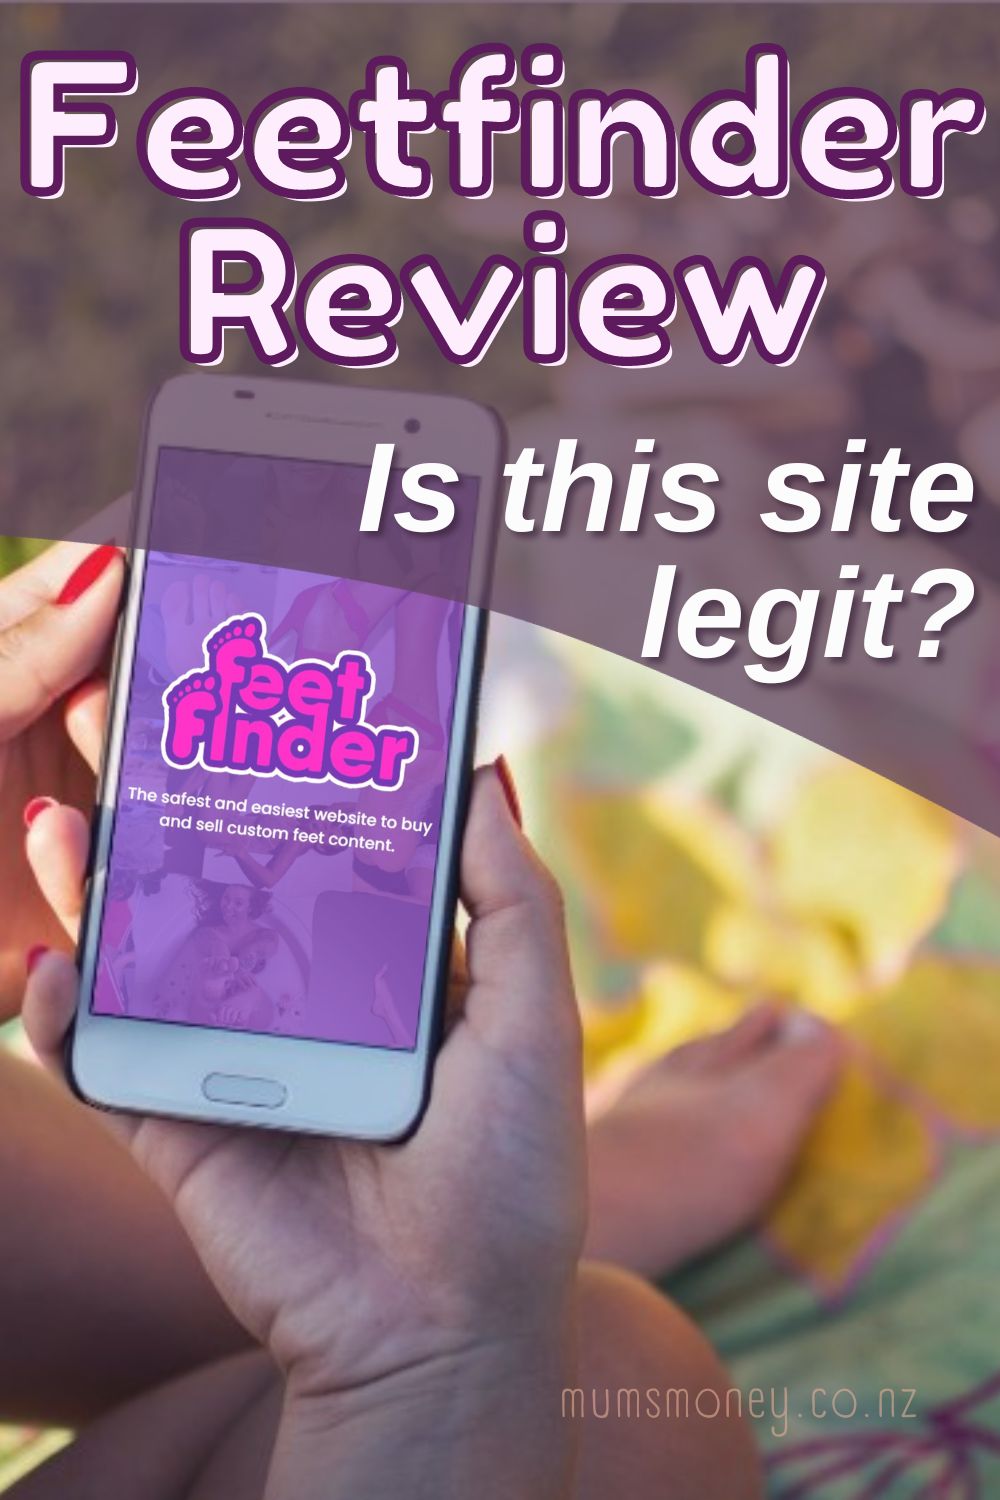 Feetfinder Review Is This Site Legit Pin Image